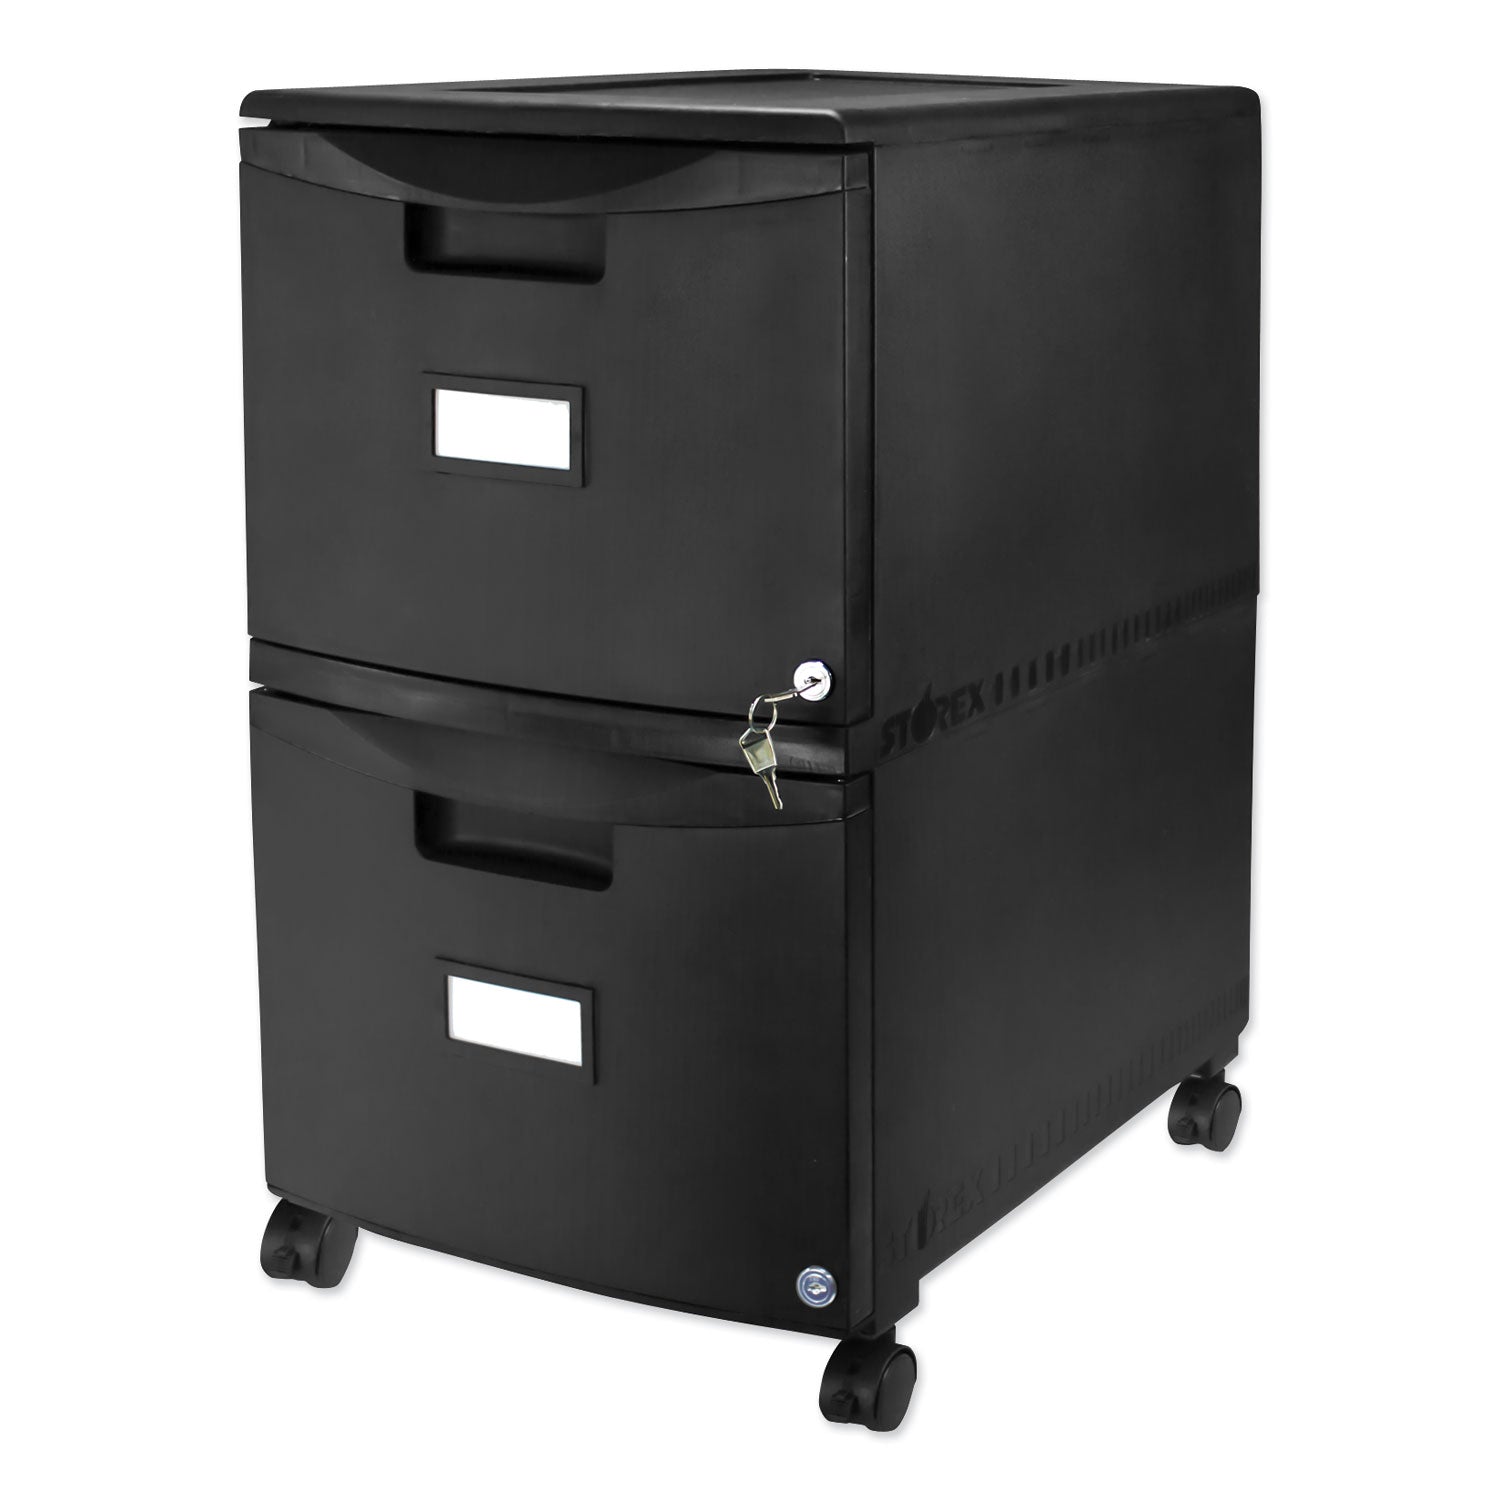 two-drawer-mobile-filing-cabinet-2-legal-letter-size-file-drawers-black-1475-x-1825-x-26_stx61312b01c - 2